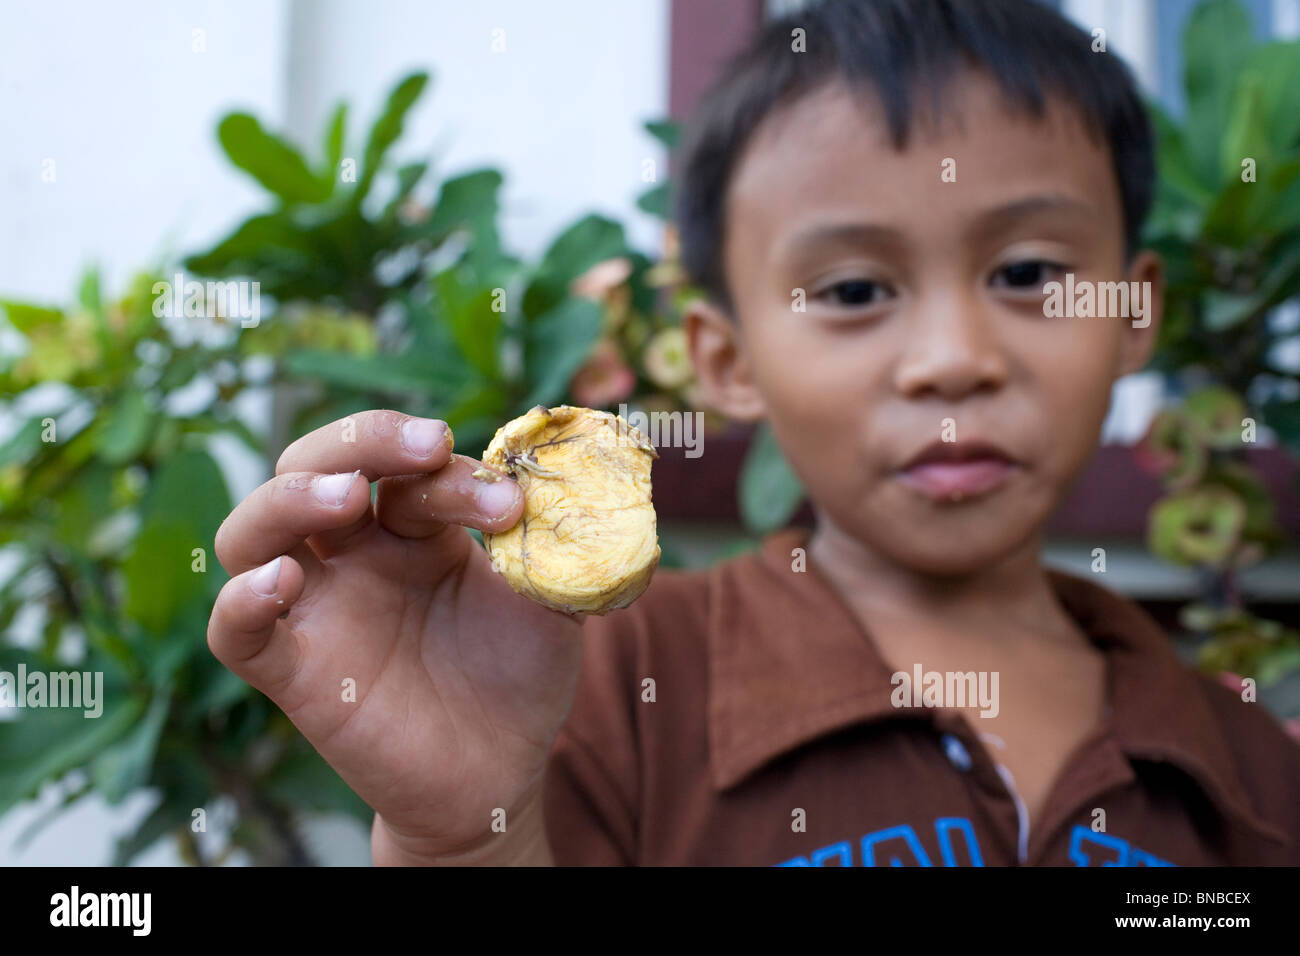 A Filipino boy displays the yolk of a balut, or cooked fertilized duck egg, while enjoying the delicacy in the Philippines. Stock Photo